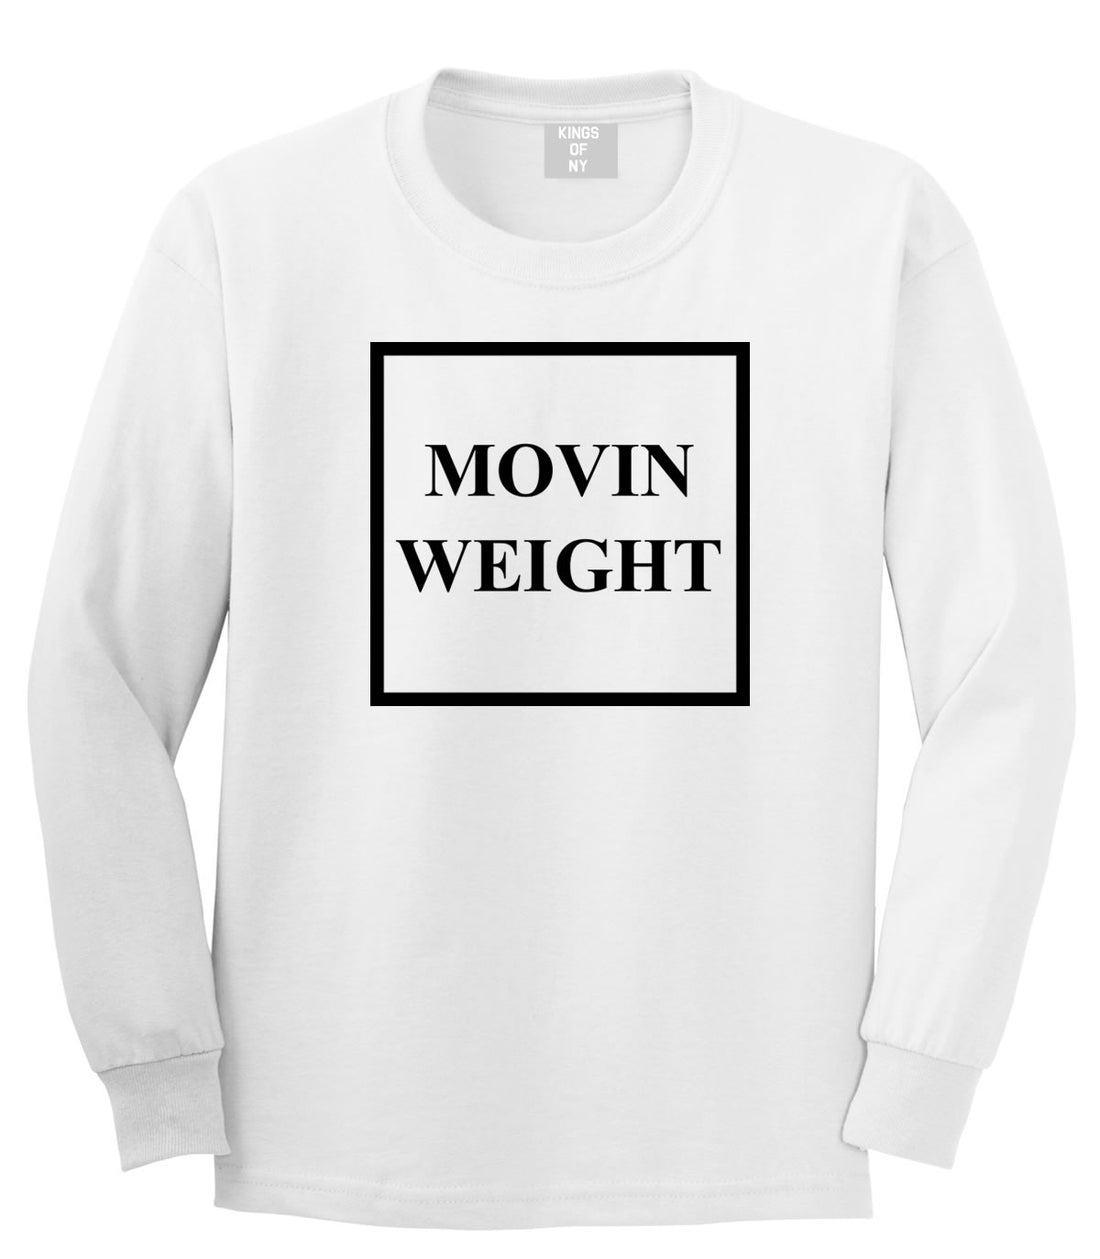 Movin Weight Hustler Boys Kids Long Sleeve T-Shirt in White by Kings Of NY